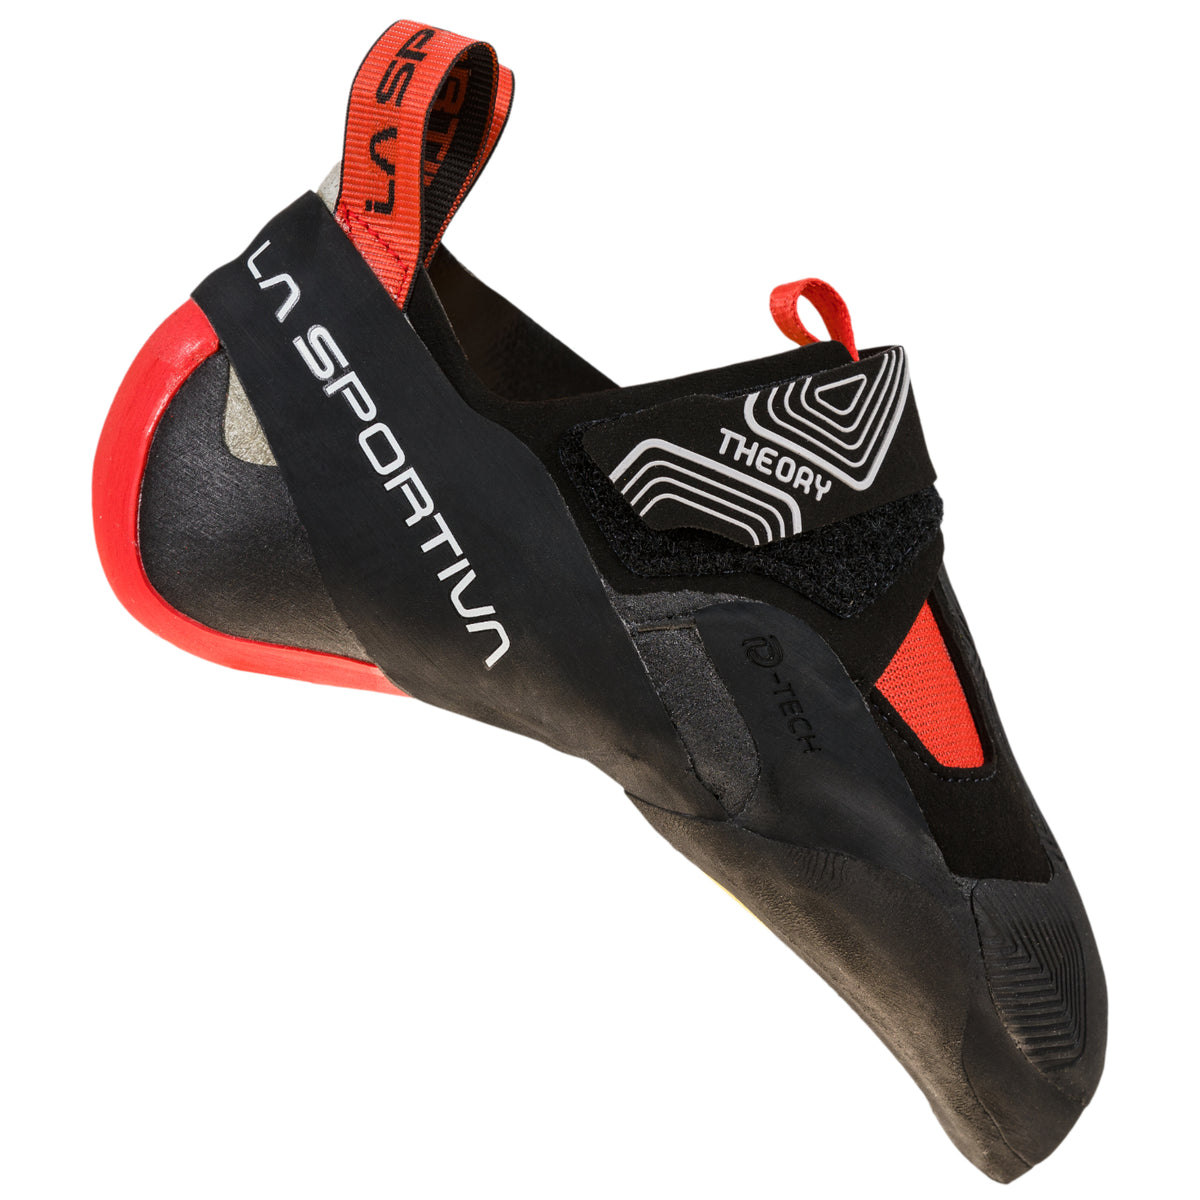 La Sportiva Theory Womens in black and red 